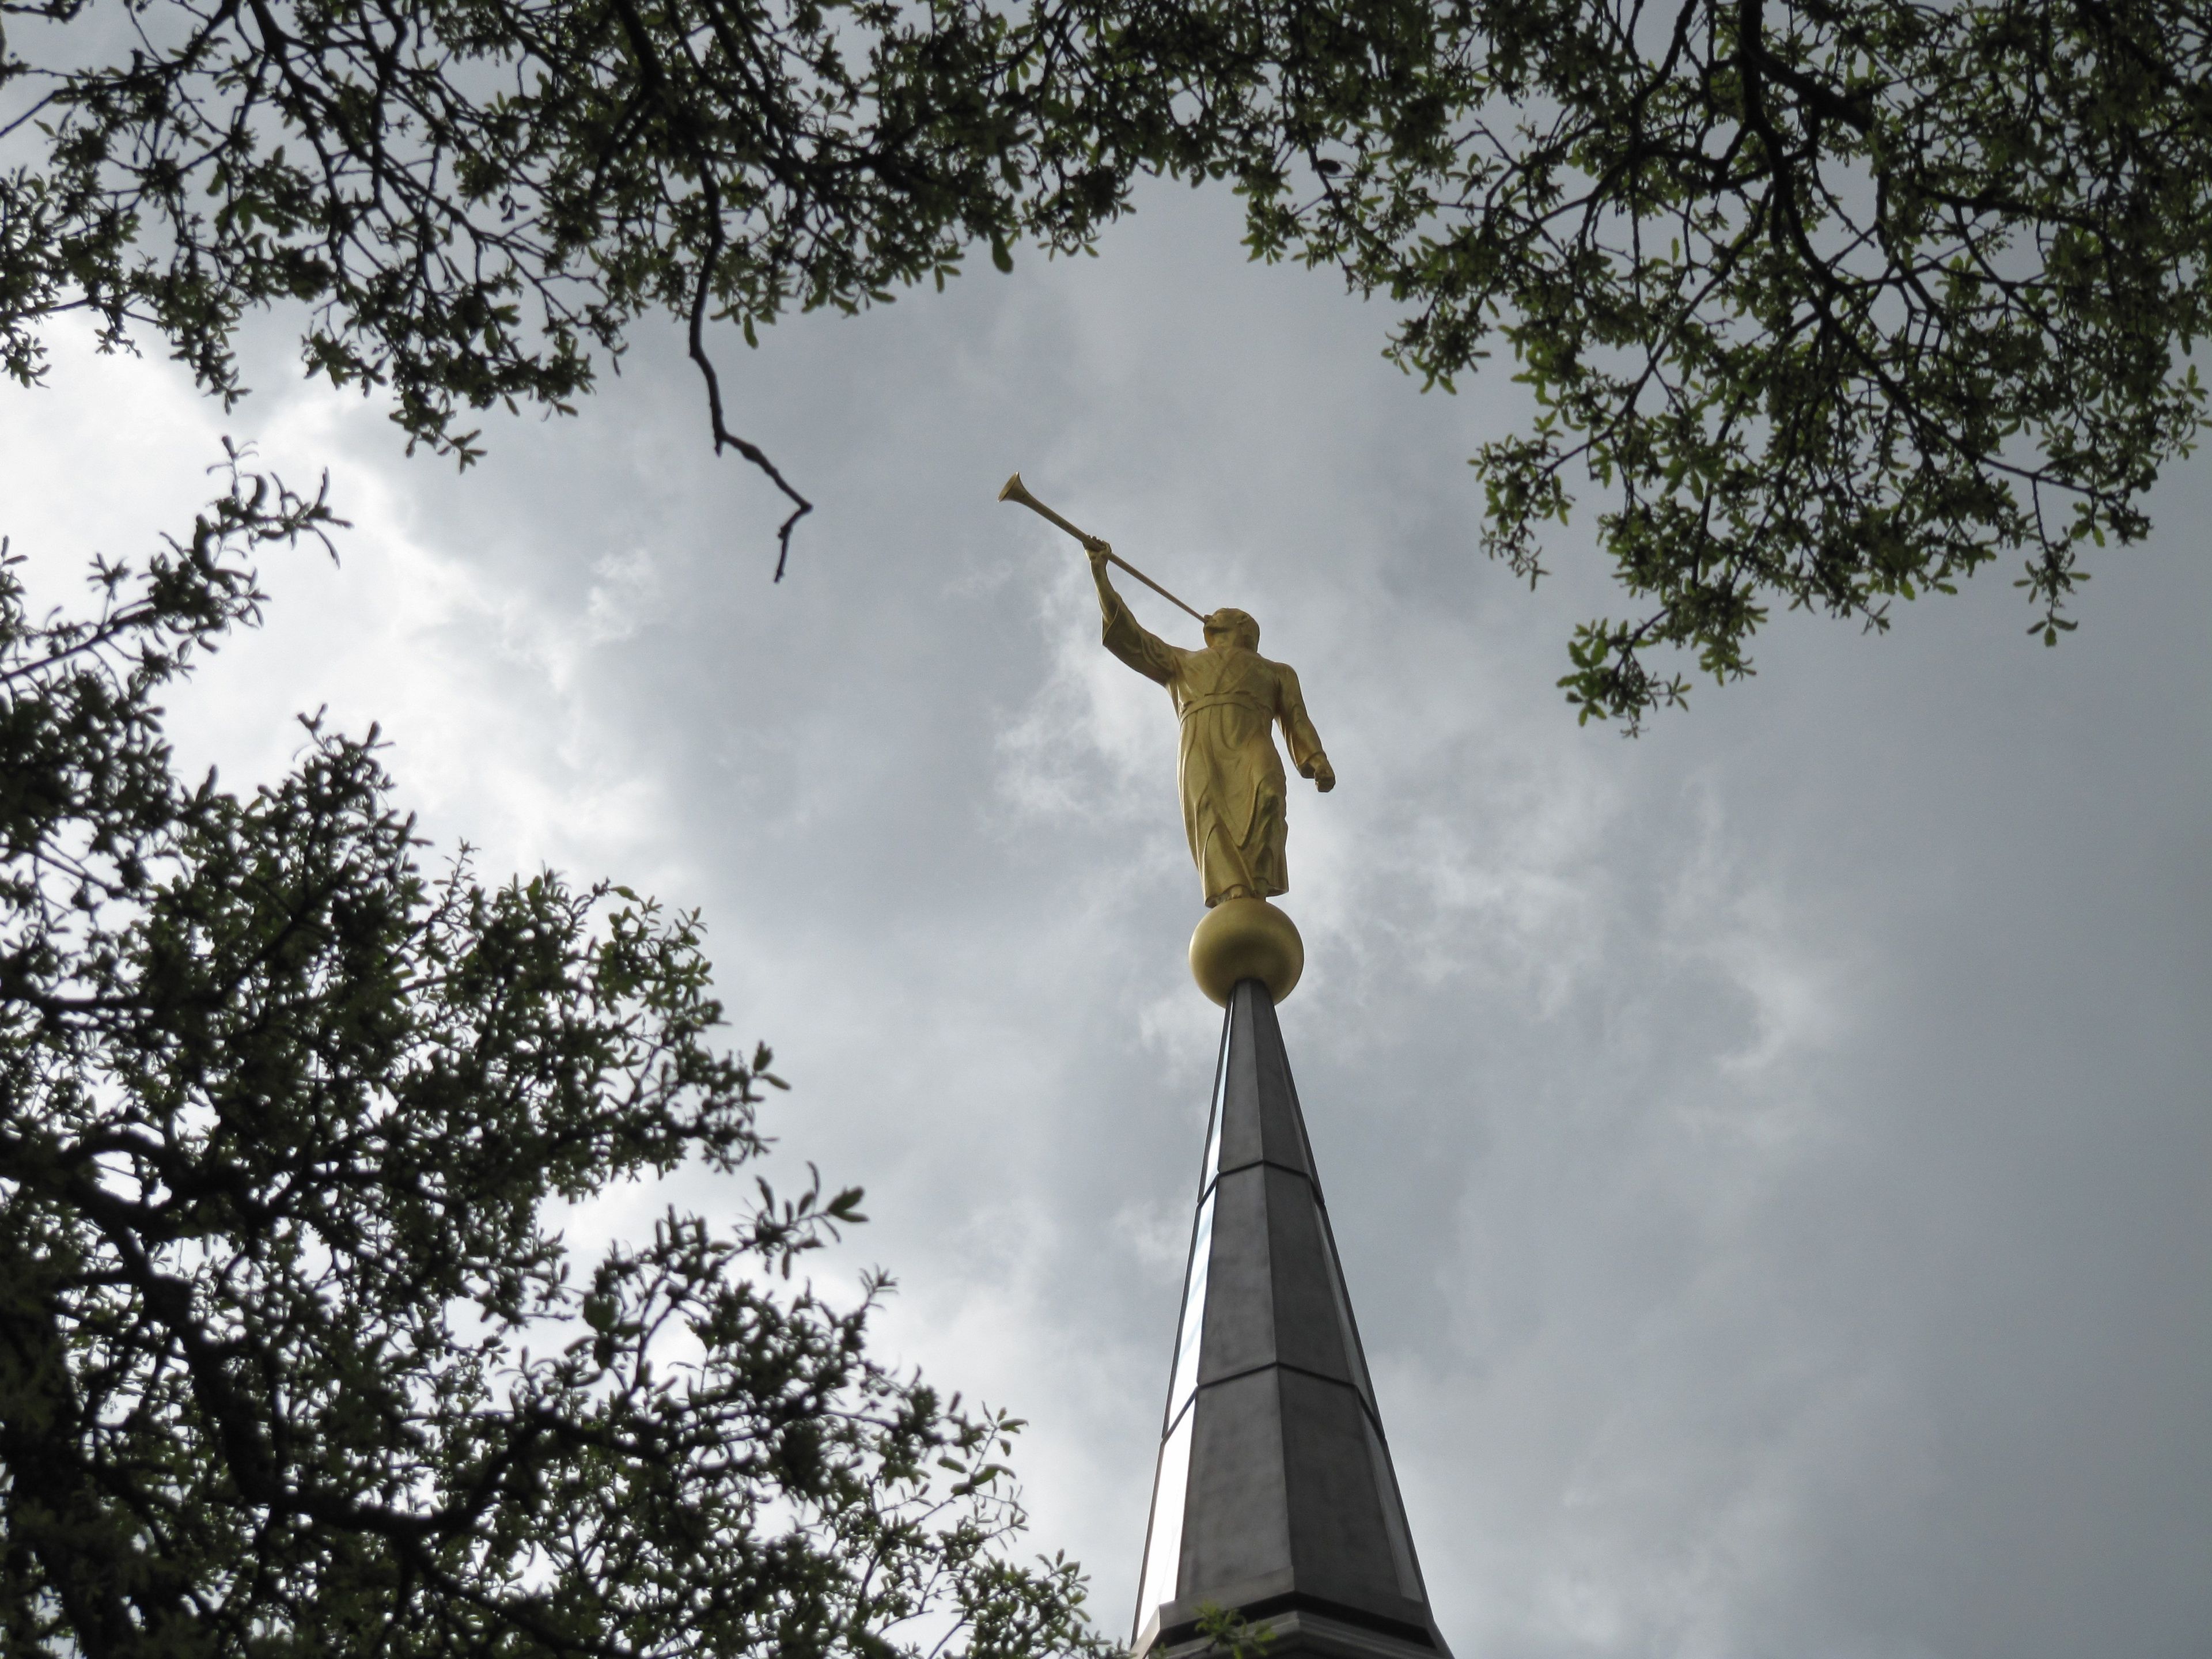 An image of the angel Moroni statue on top of the Sacramento California Temple.